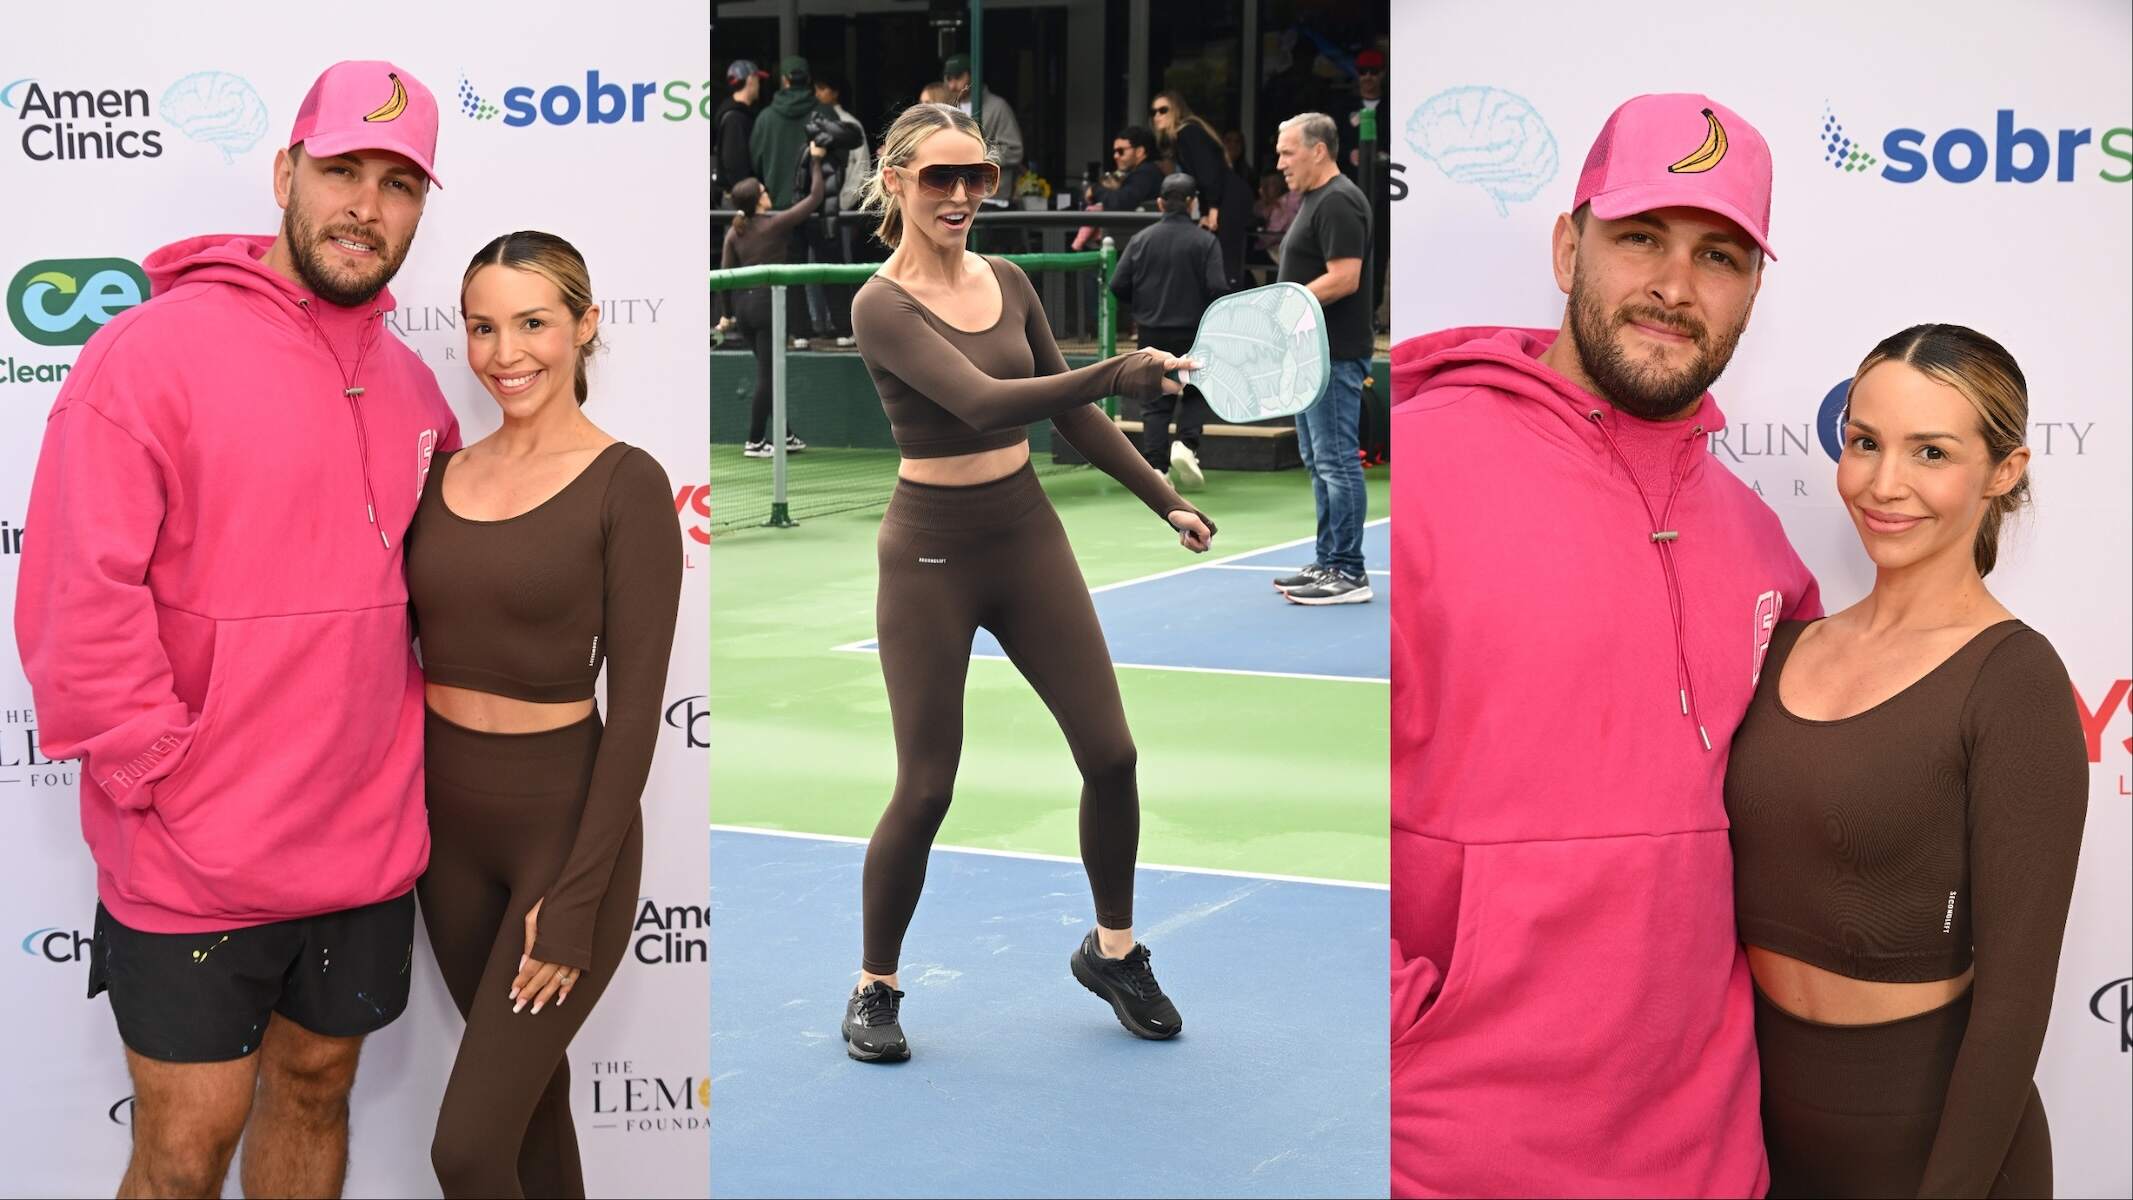 Wearing a brown matching set, Scheana Shay plays pickleball at a charity tournament and poses with husband Brock Davies